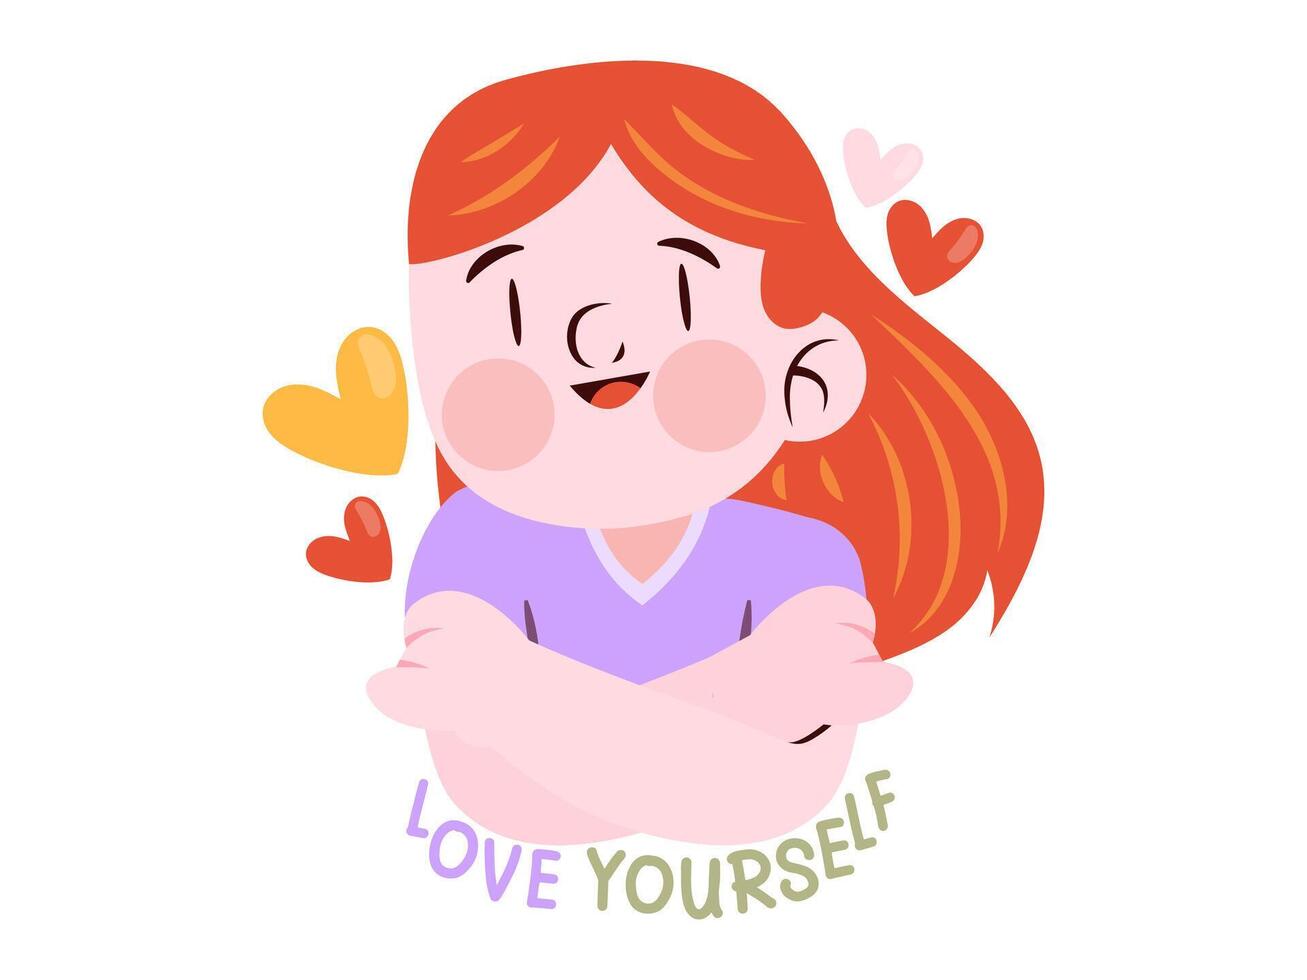 love yourself design with modern illustration concept style for self care sticker illustration vector